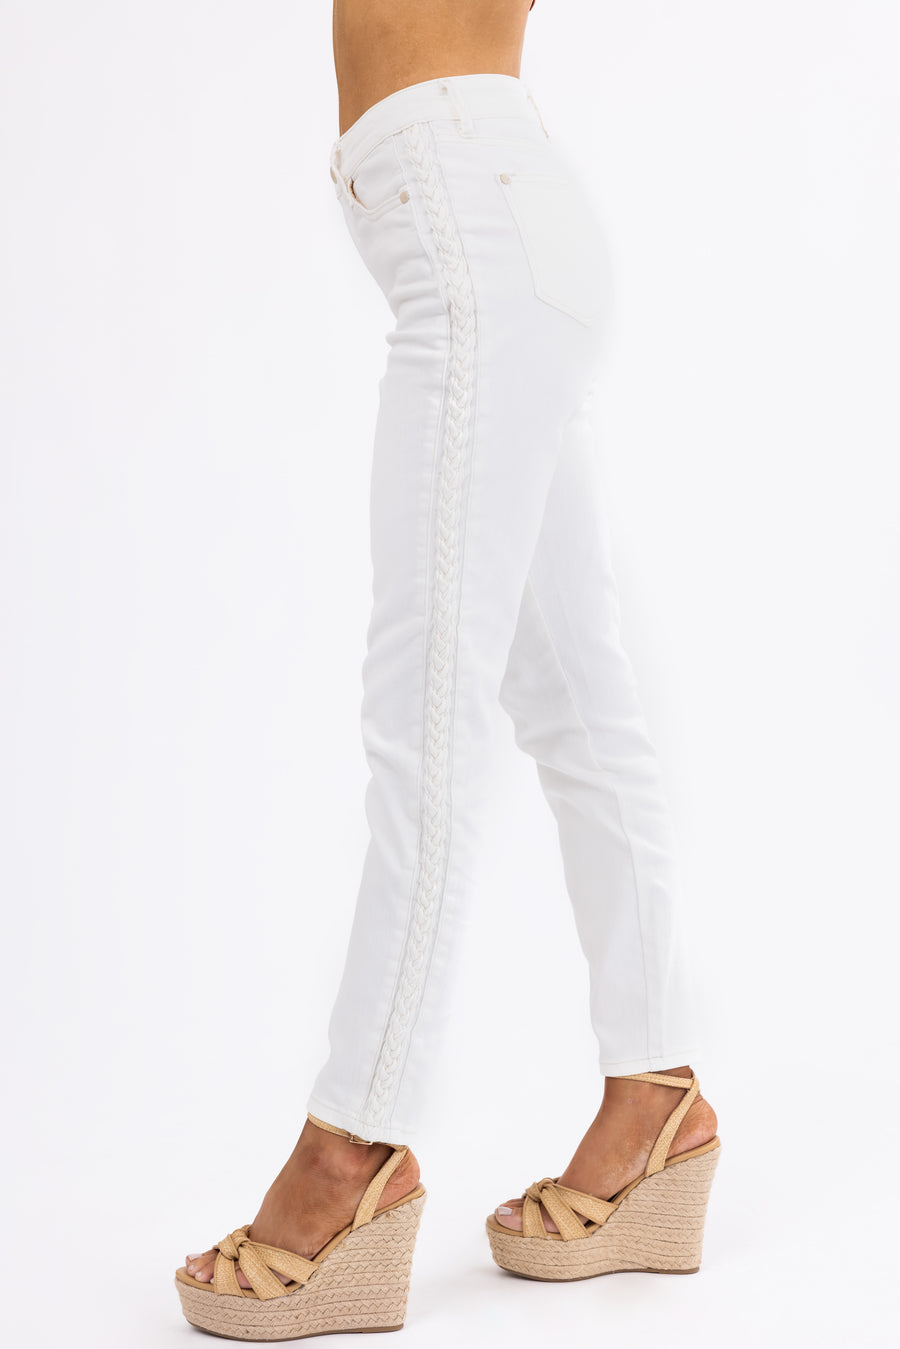 Judy Blue Off White Braided Relaxed Skinny Jeans